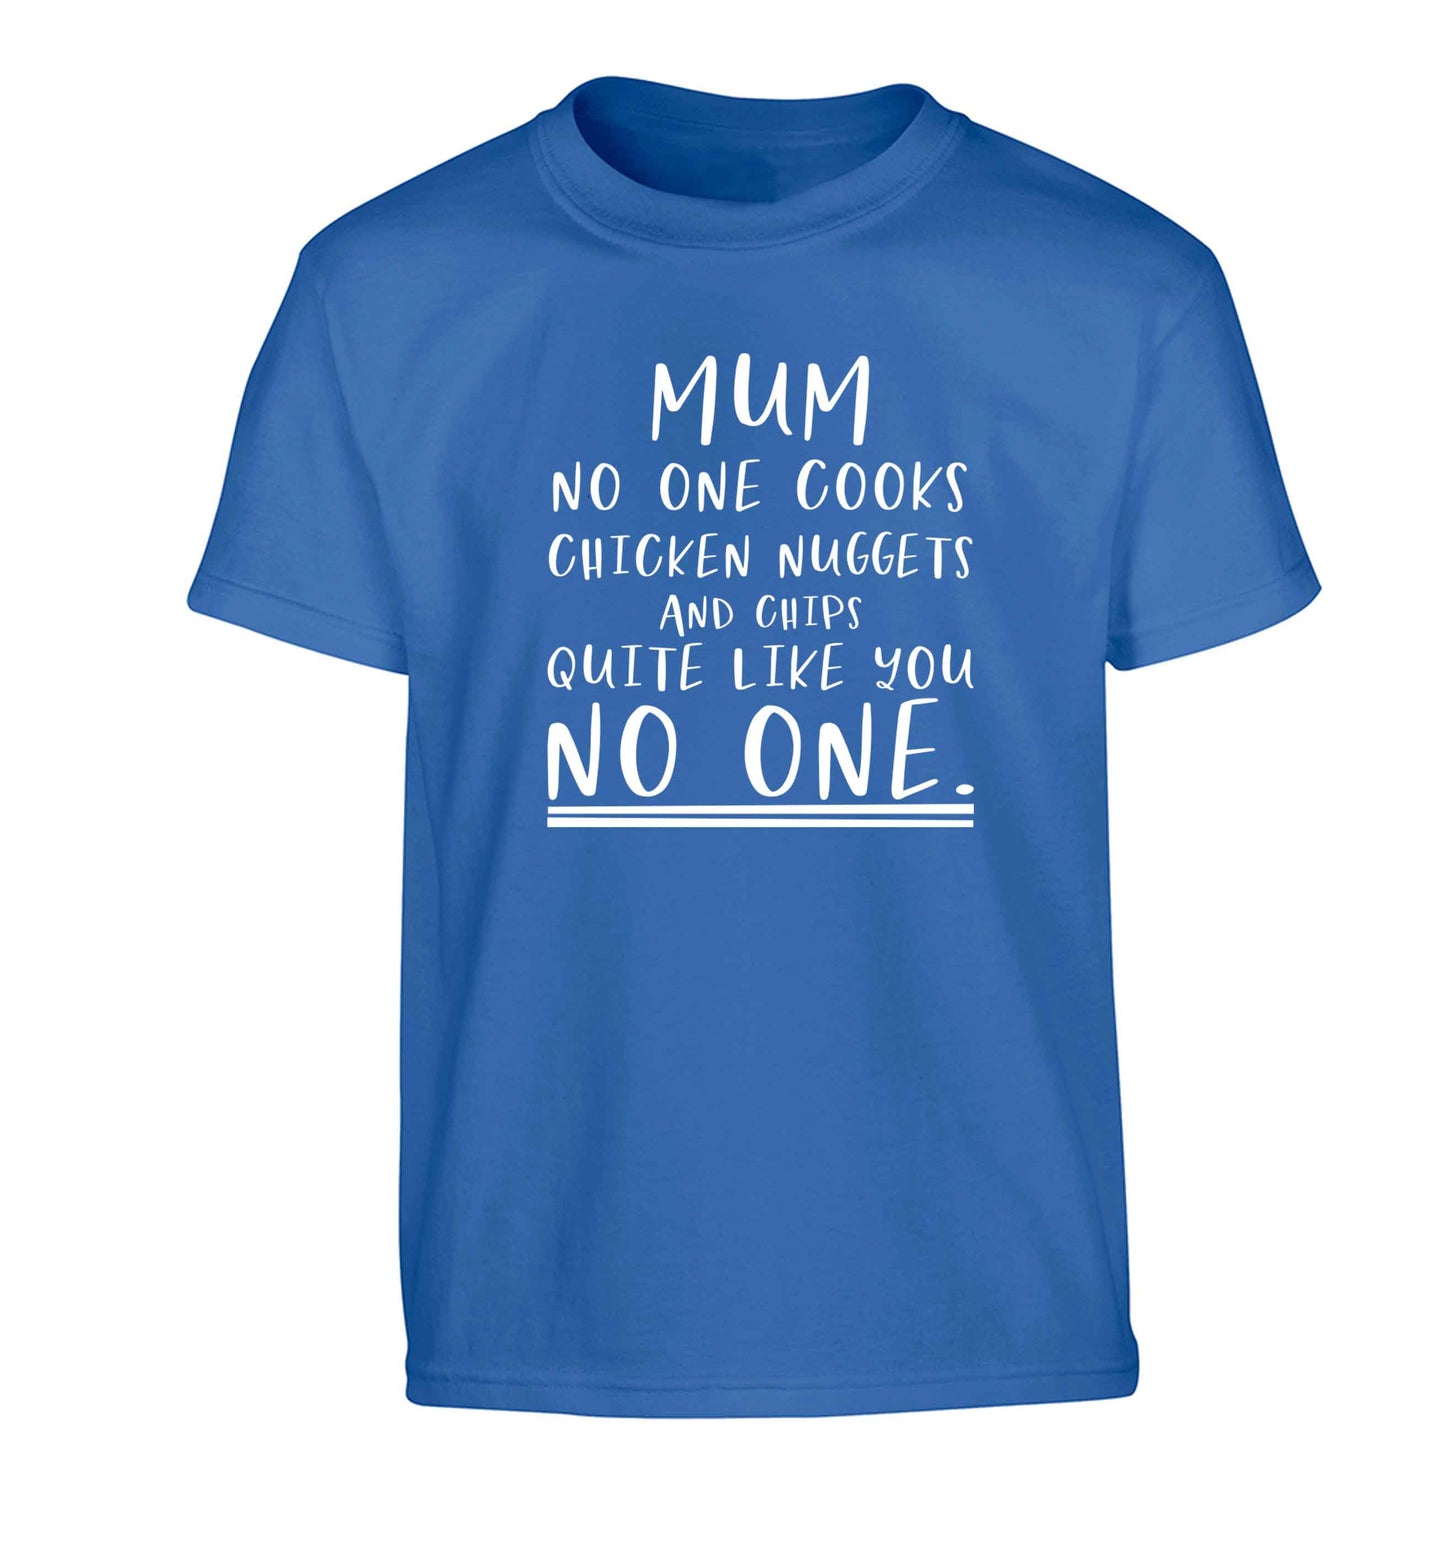 Super funny sassy gift for mother's day or birthday!  Mum no one cooks chicken nuggets and chips like you no one Children's blue Tshirt 12-13 Years